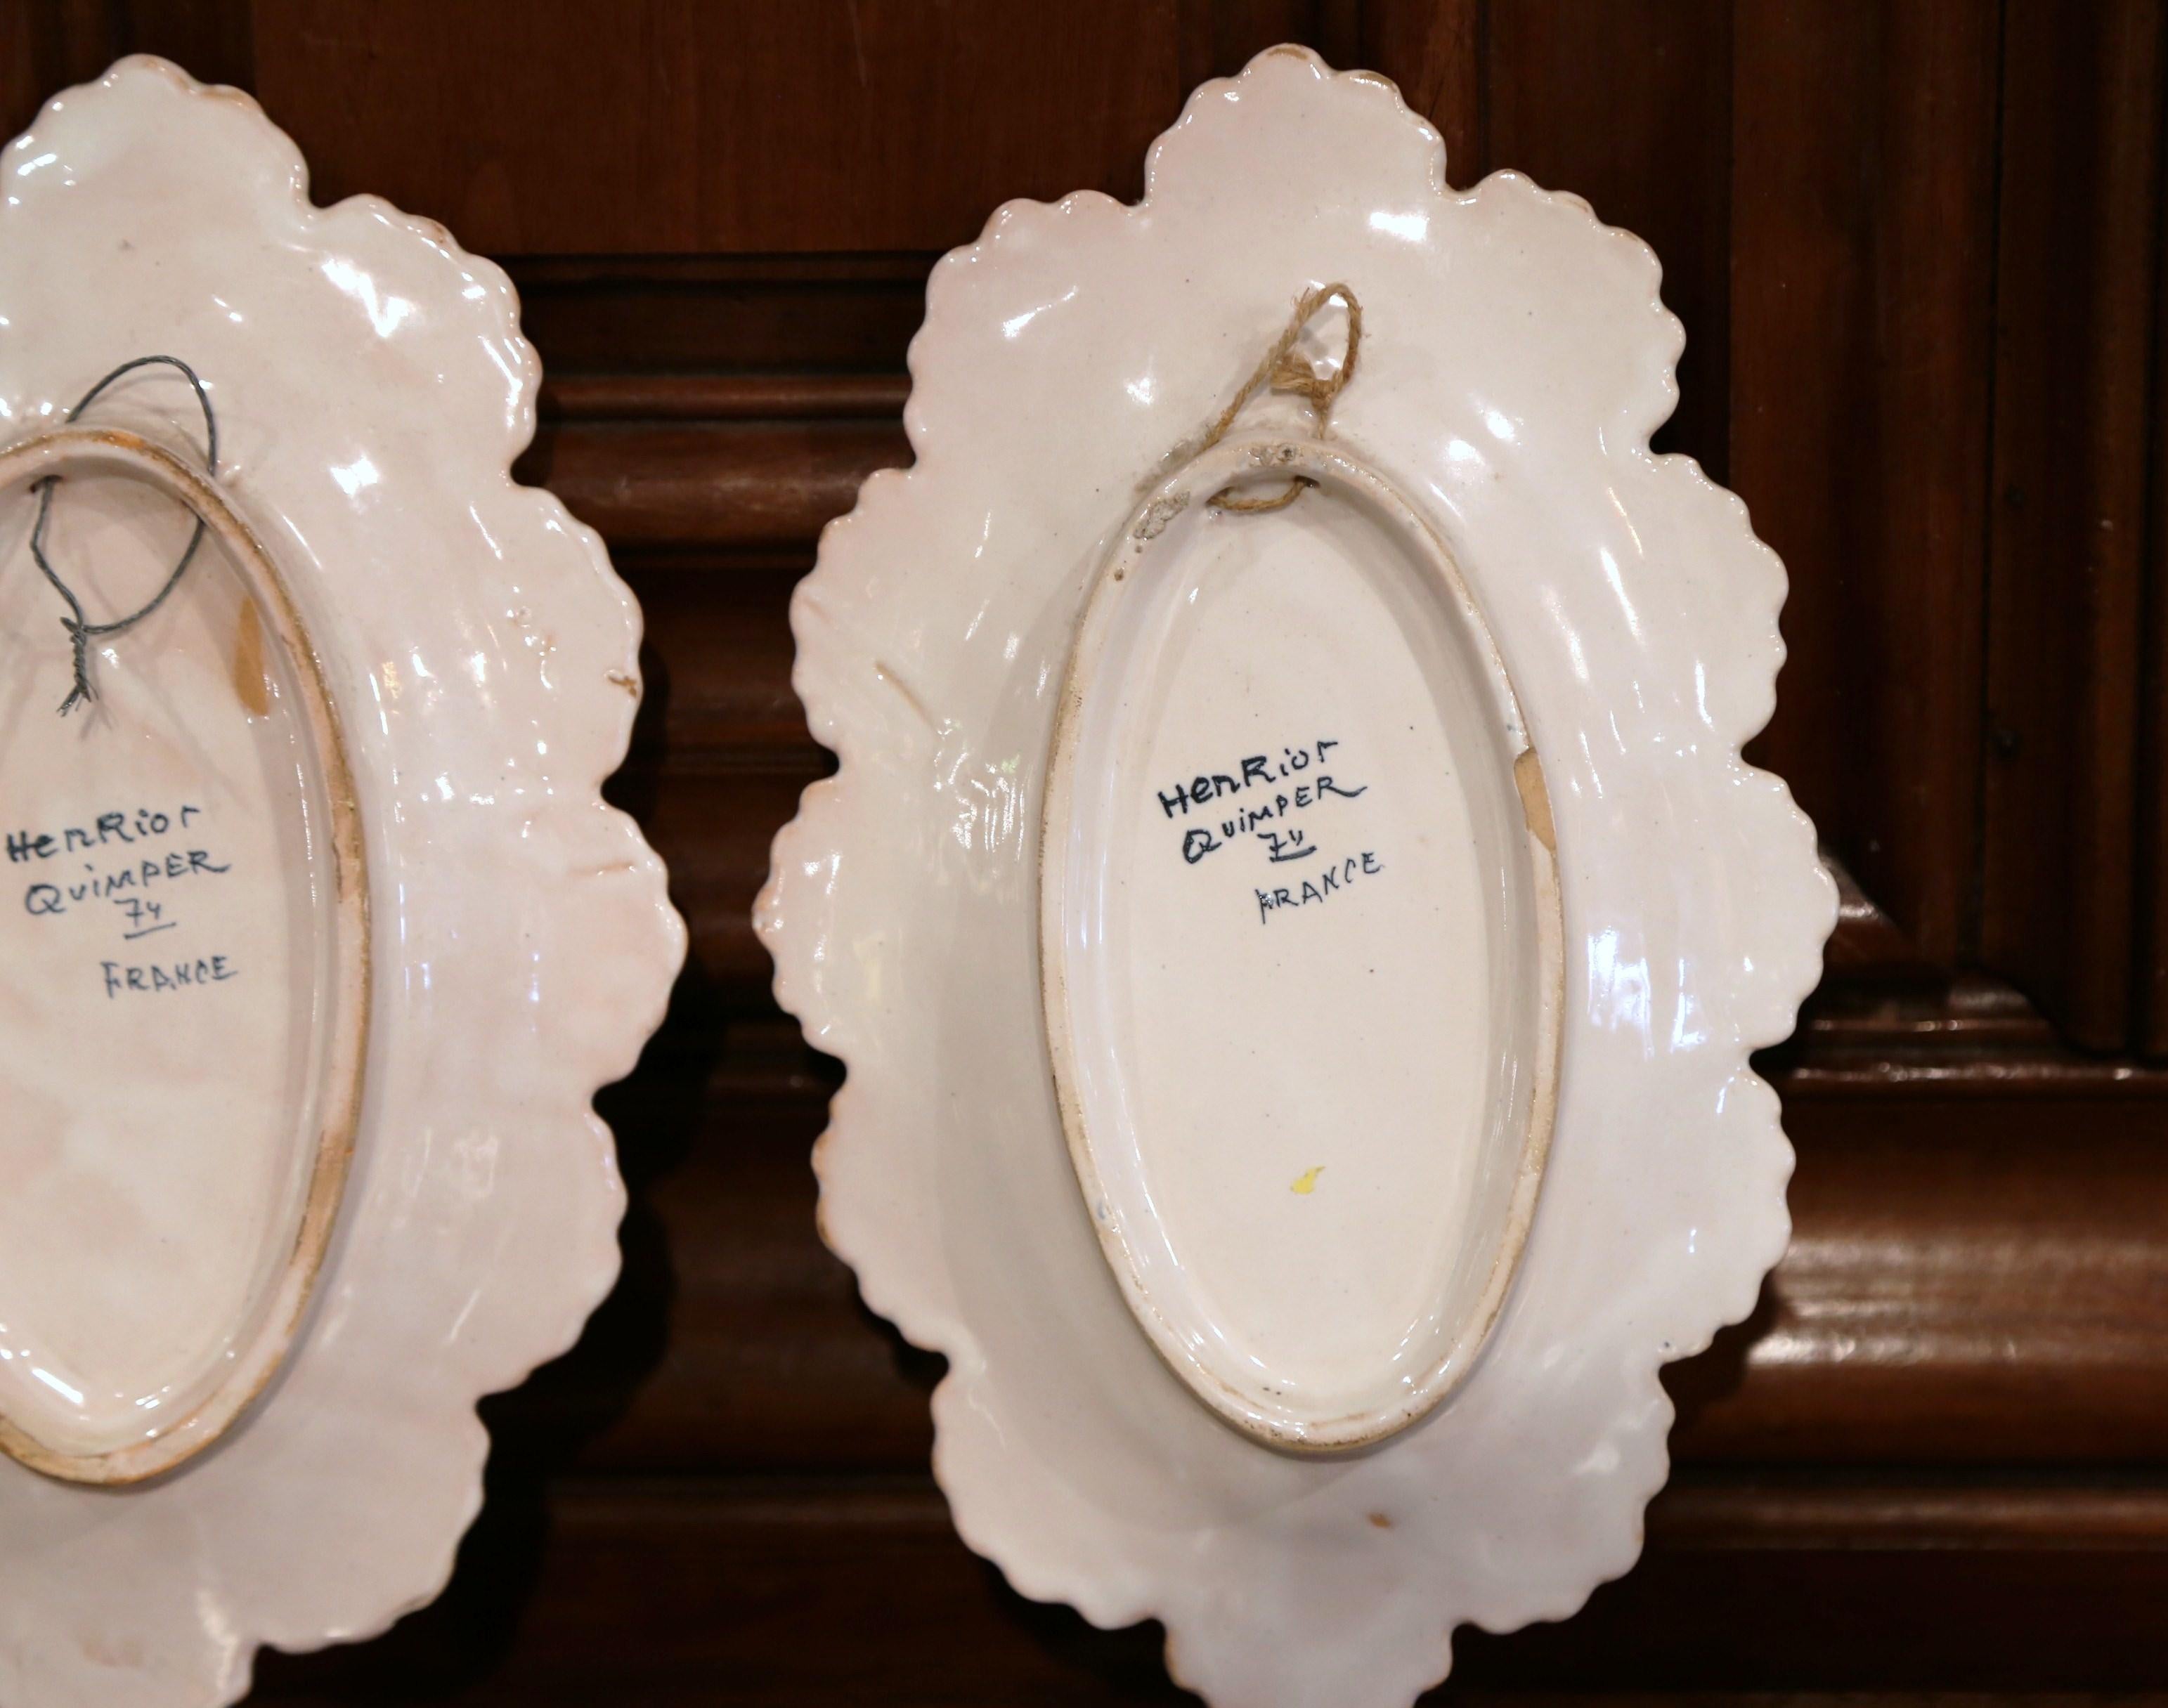 Pair of 19th Century French Faience Oval Wall Plates Signed Henriot Quimper 2